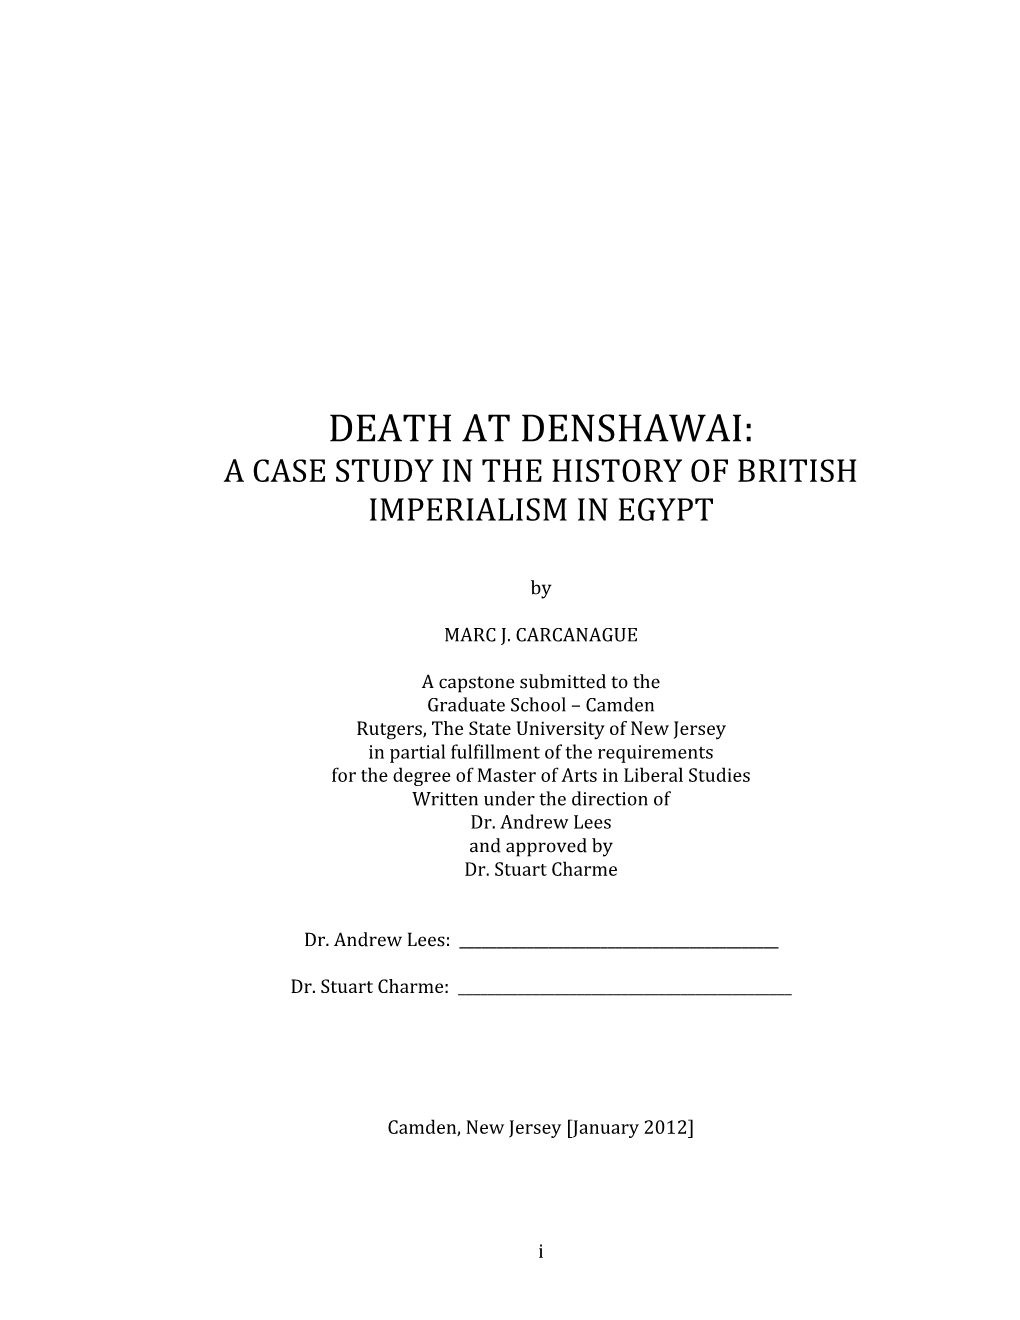 Death at Denshawai: a Case Study in the History of British Imperialism in Egypt